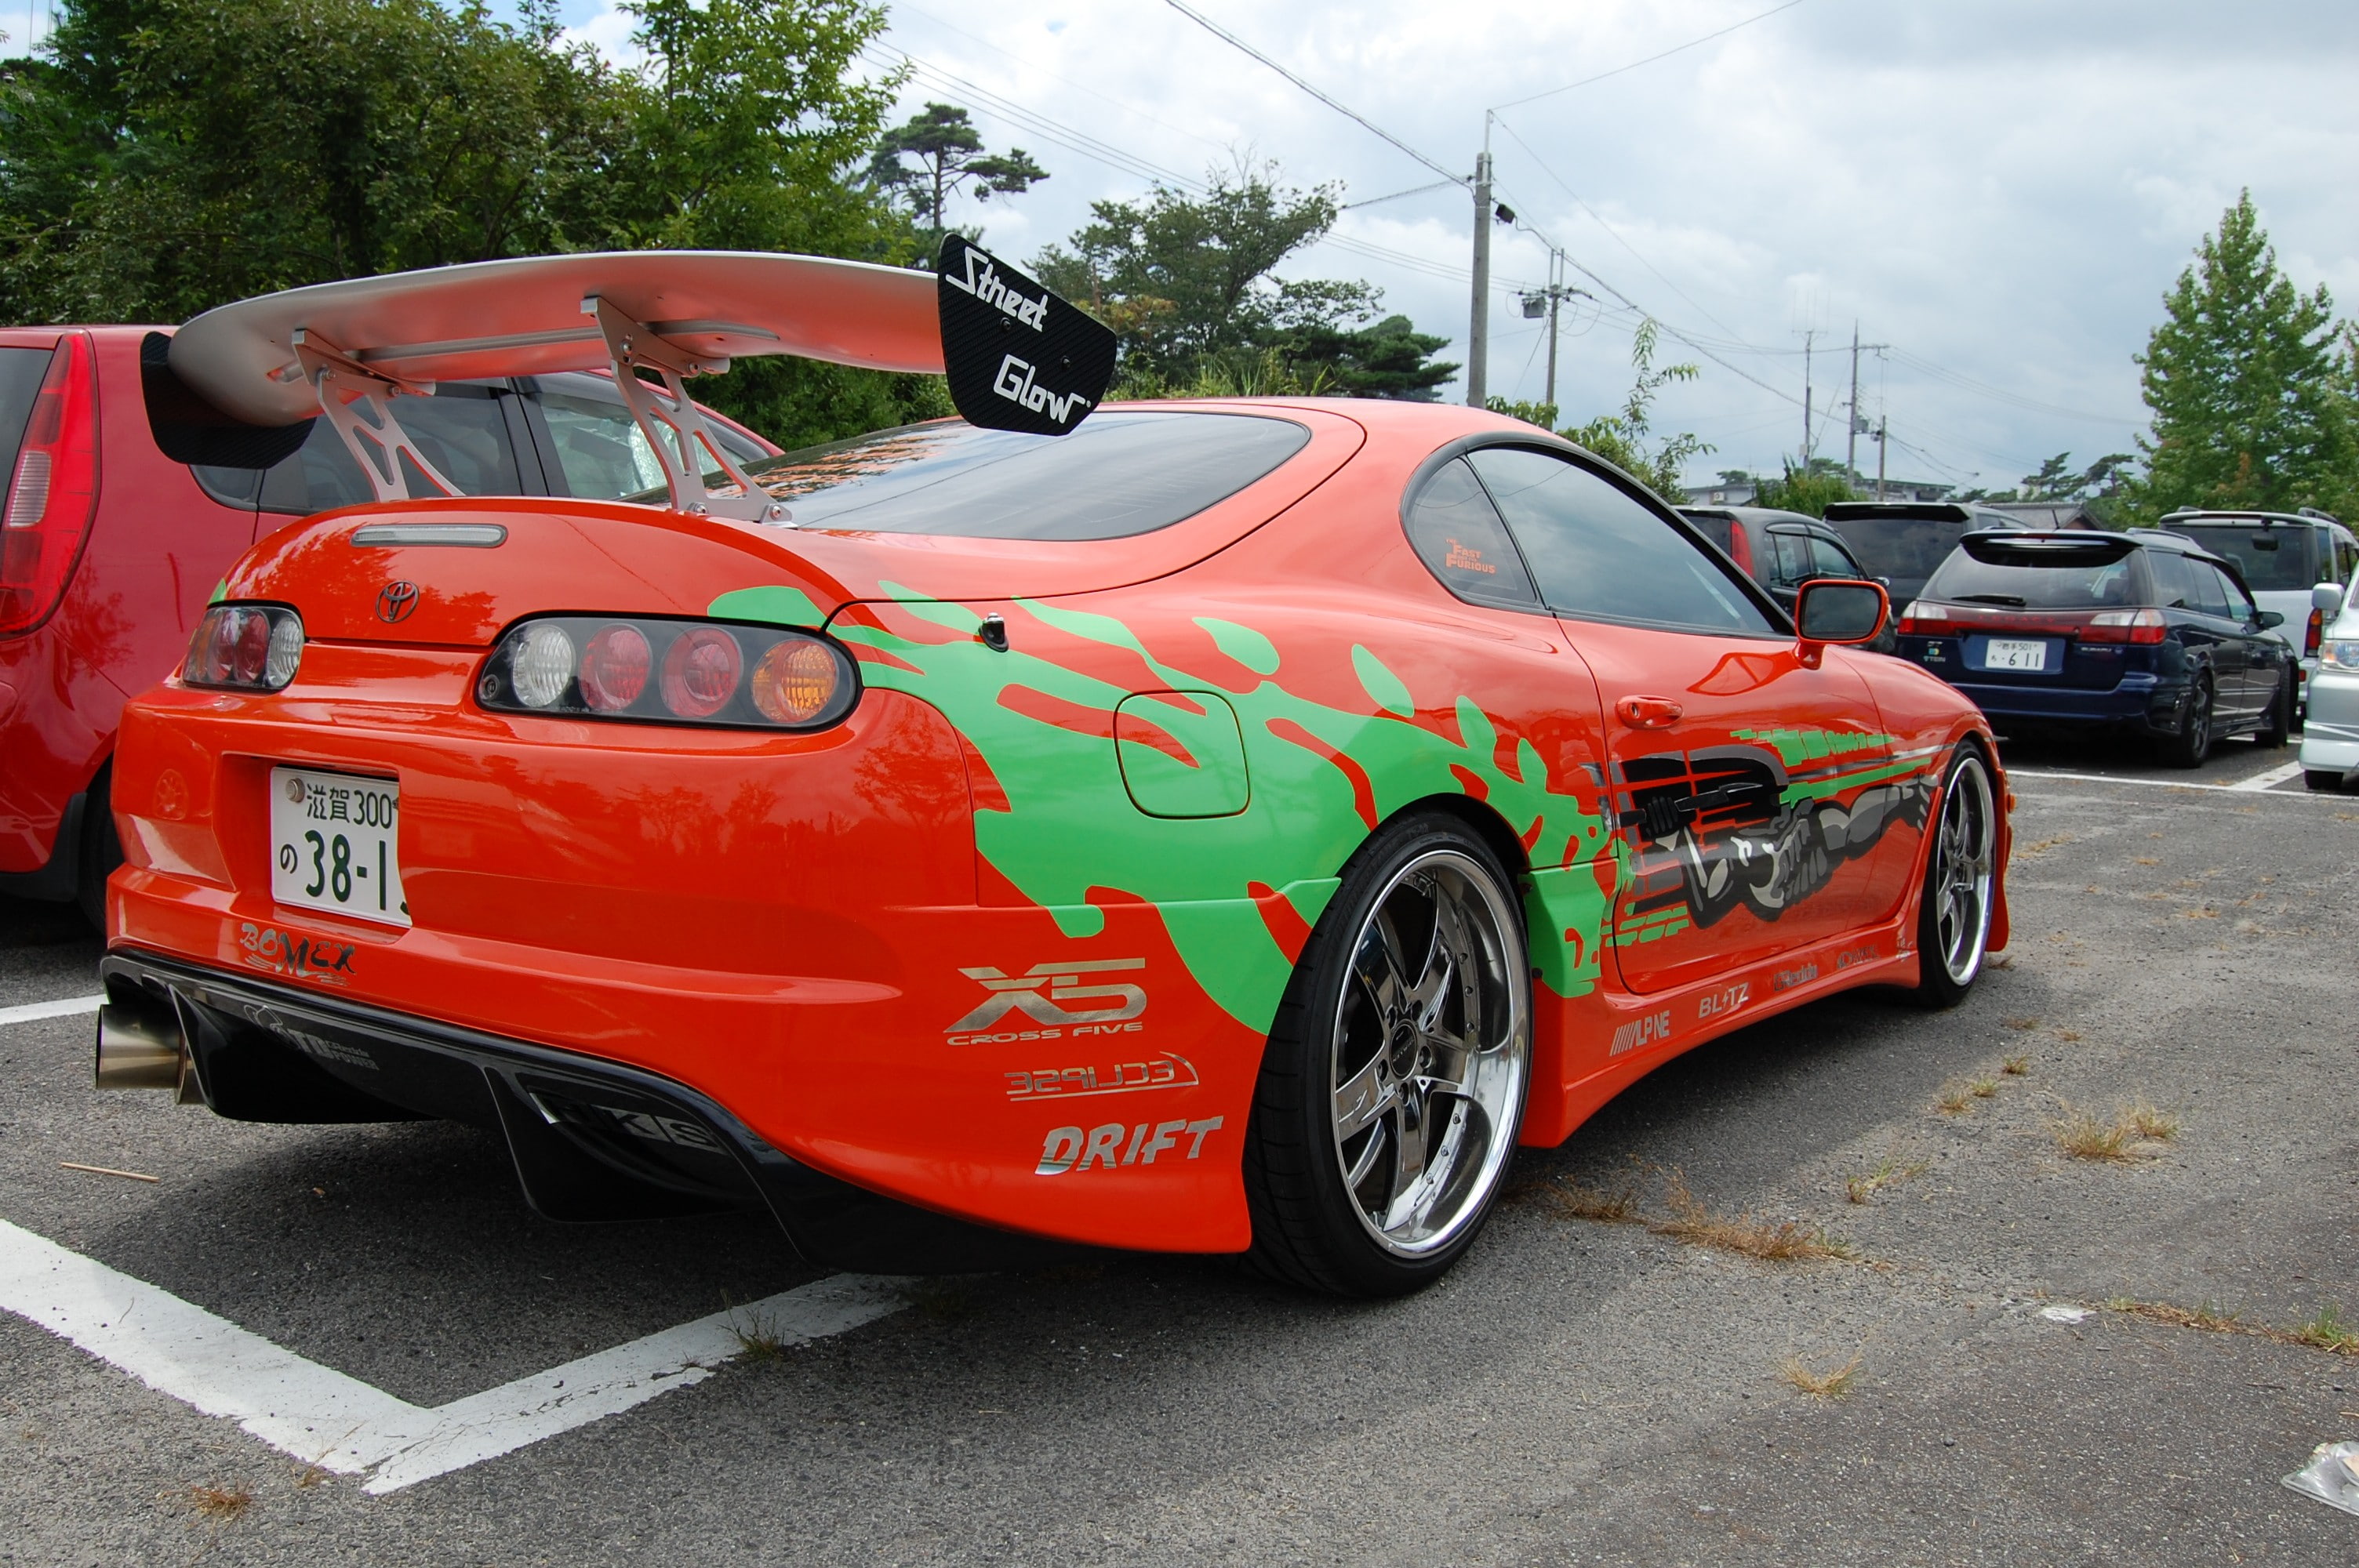 Toyota Supra, car, vehicle, red cars, Fast and Furious, mode of transportation